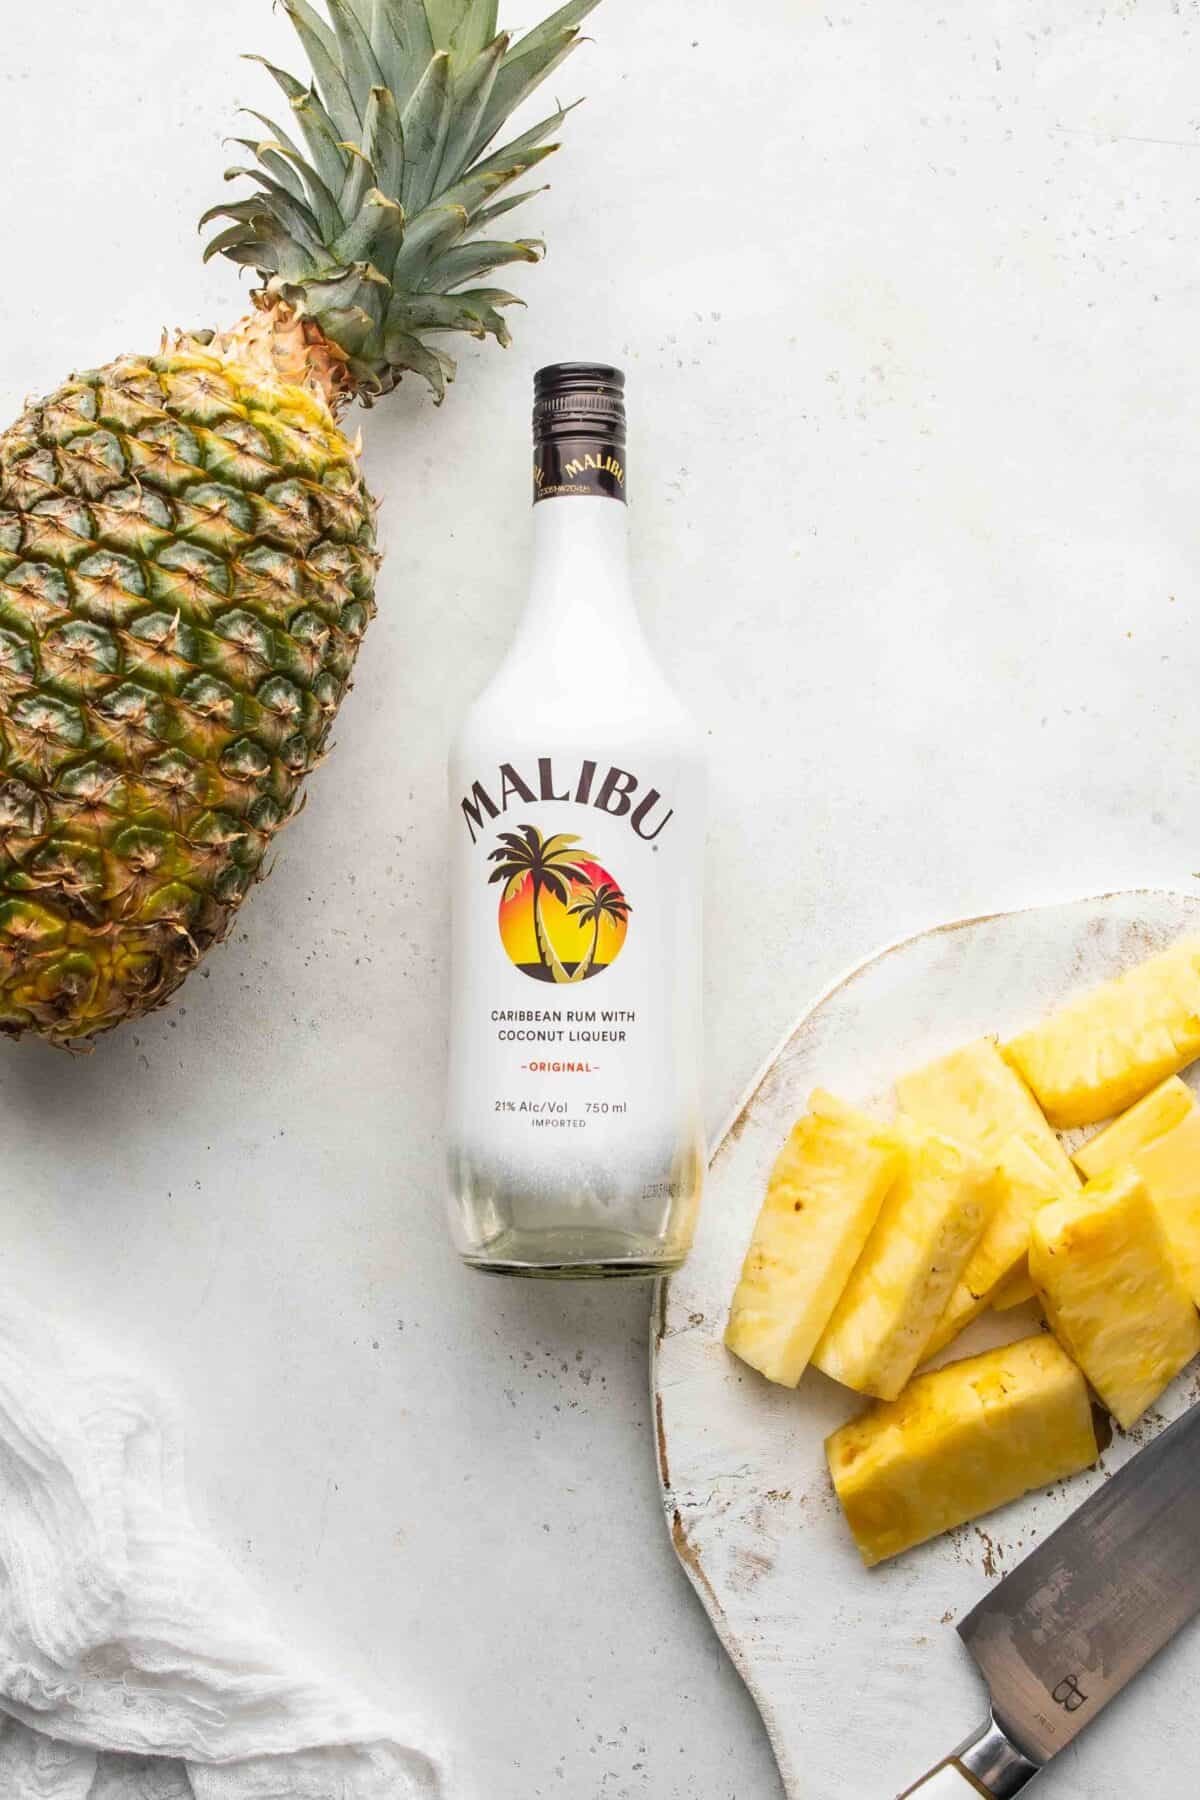 a large pineapple, bottle of malibu rum, and a plate of pineapple spears